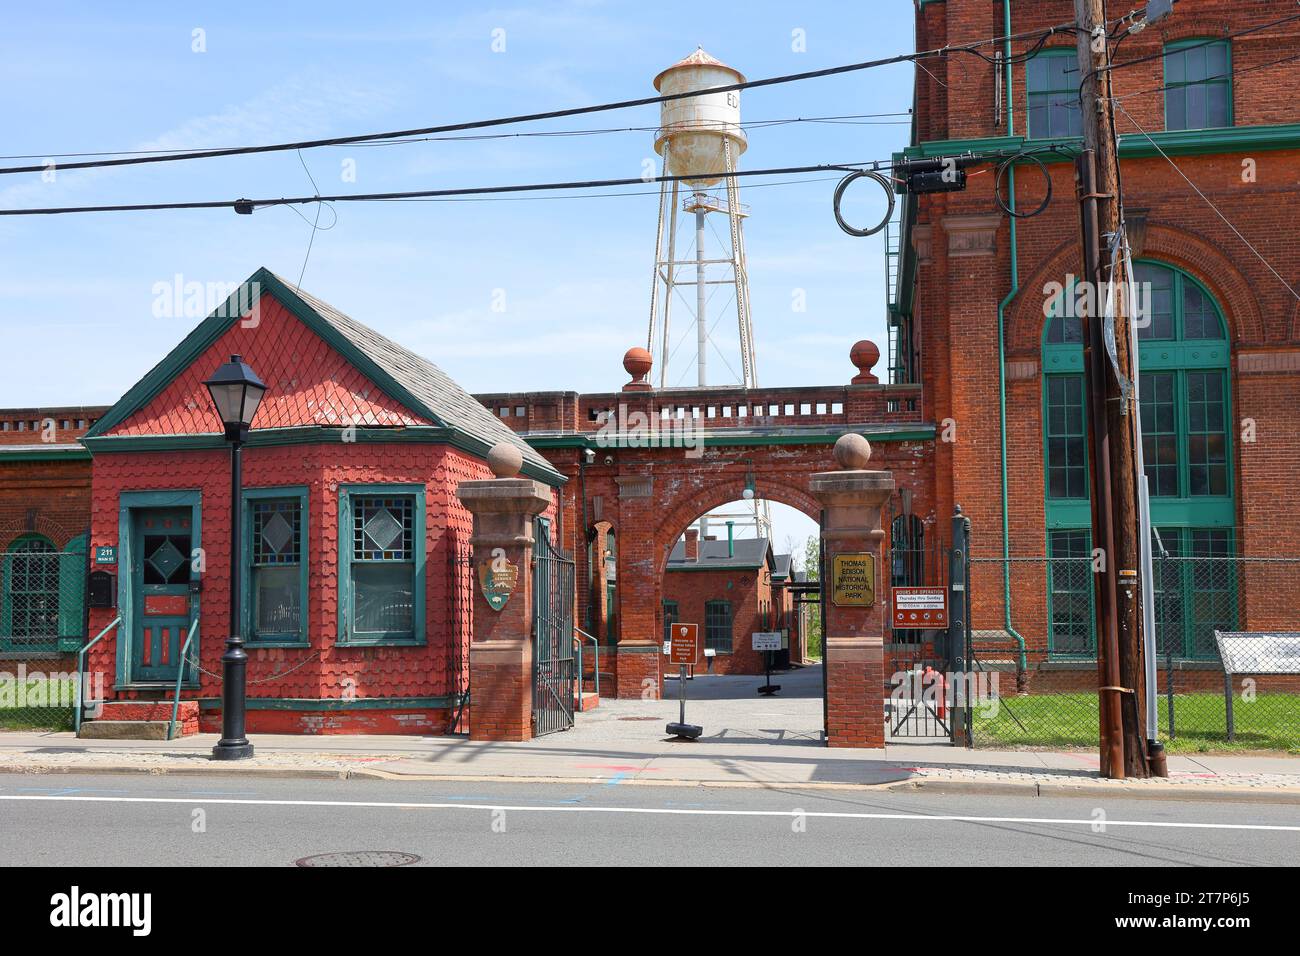 Water tower, gatehouse, and buildings at Thomas Edison National Historical Park, Edison Laboratories, West Orange, New Jersey. Stock Photo